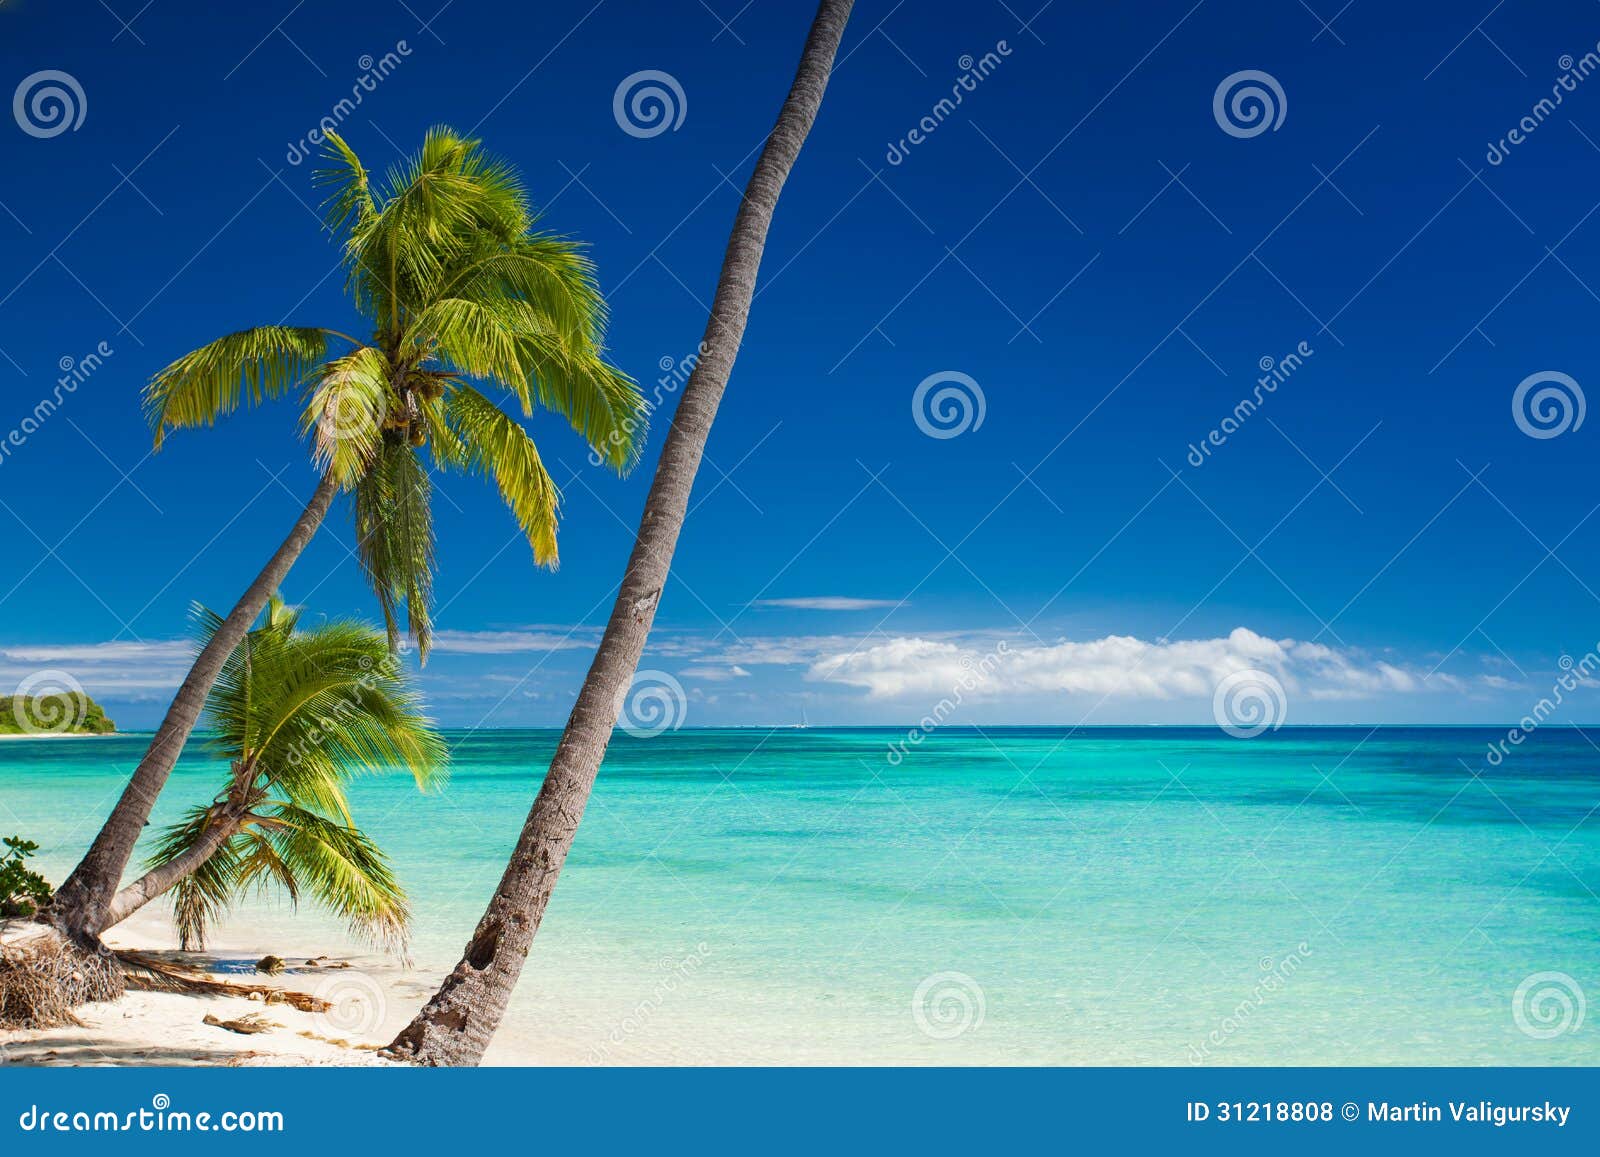 Palm Trees Hanging Over Tropical Beach Stock Photo - Image of tourism ...